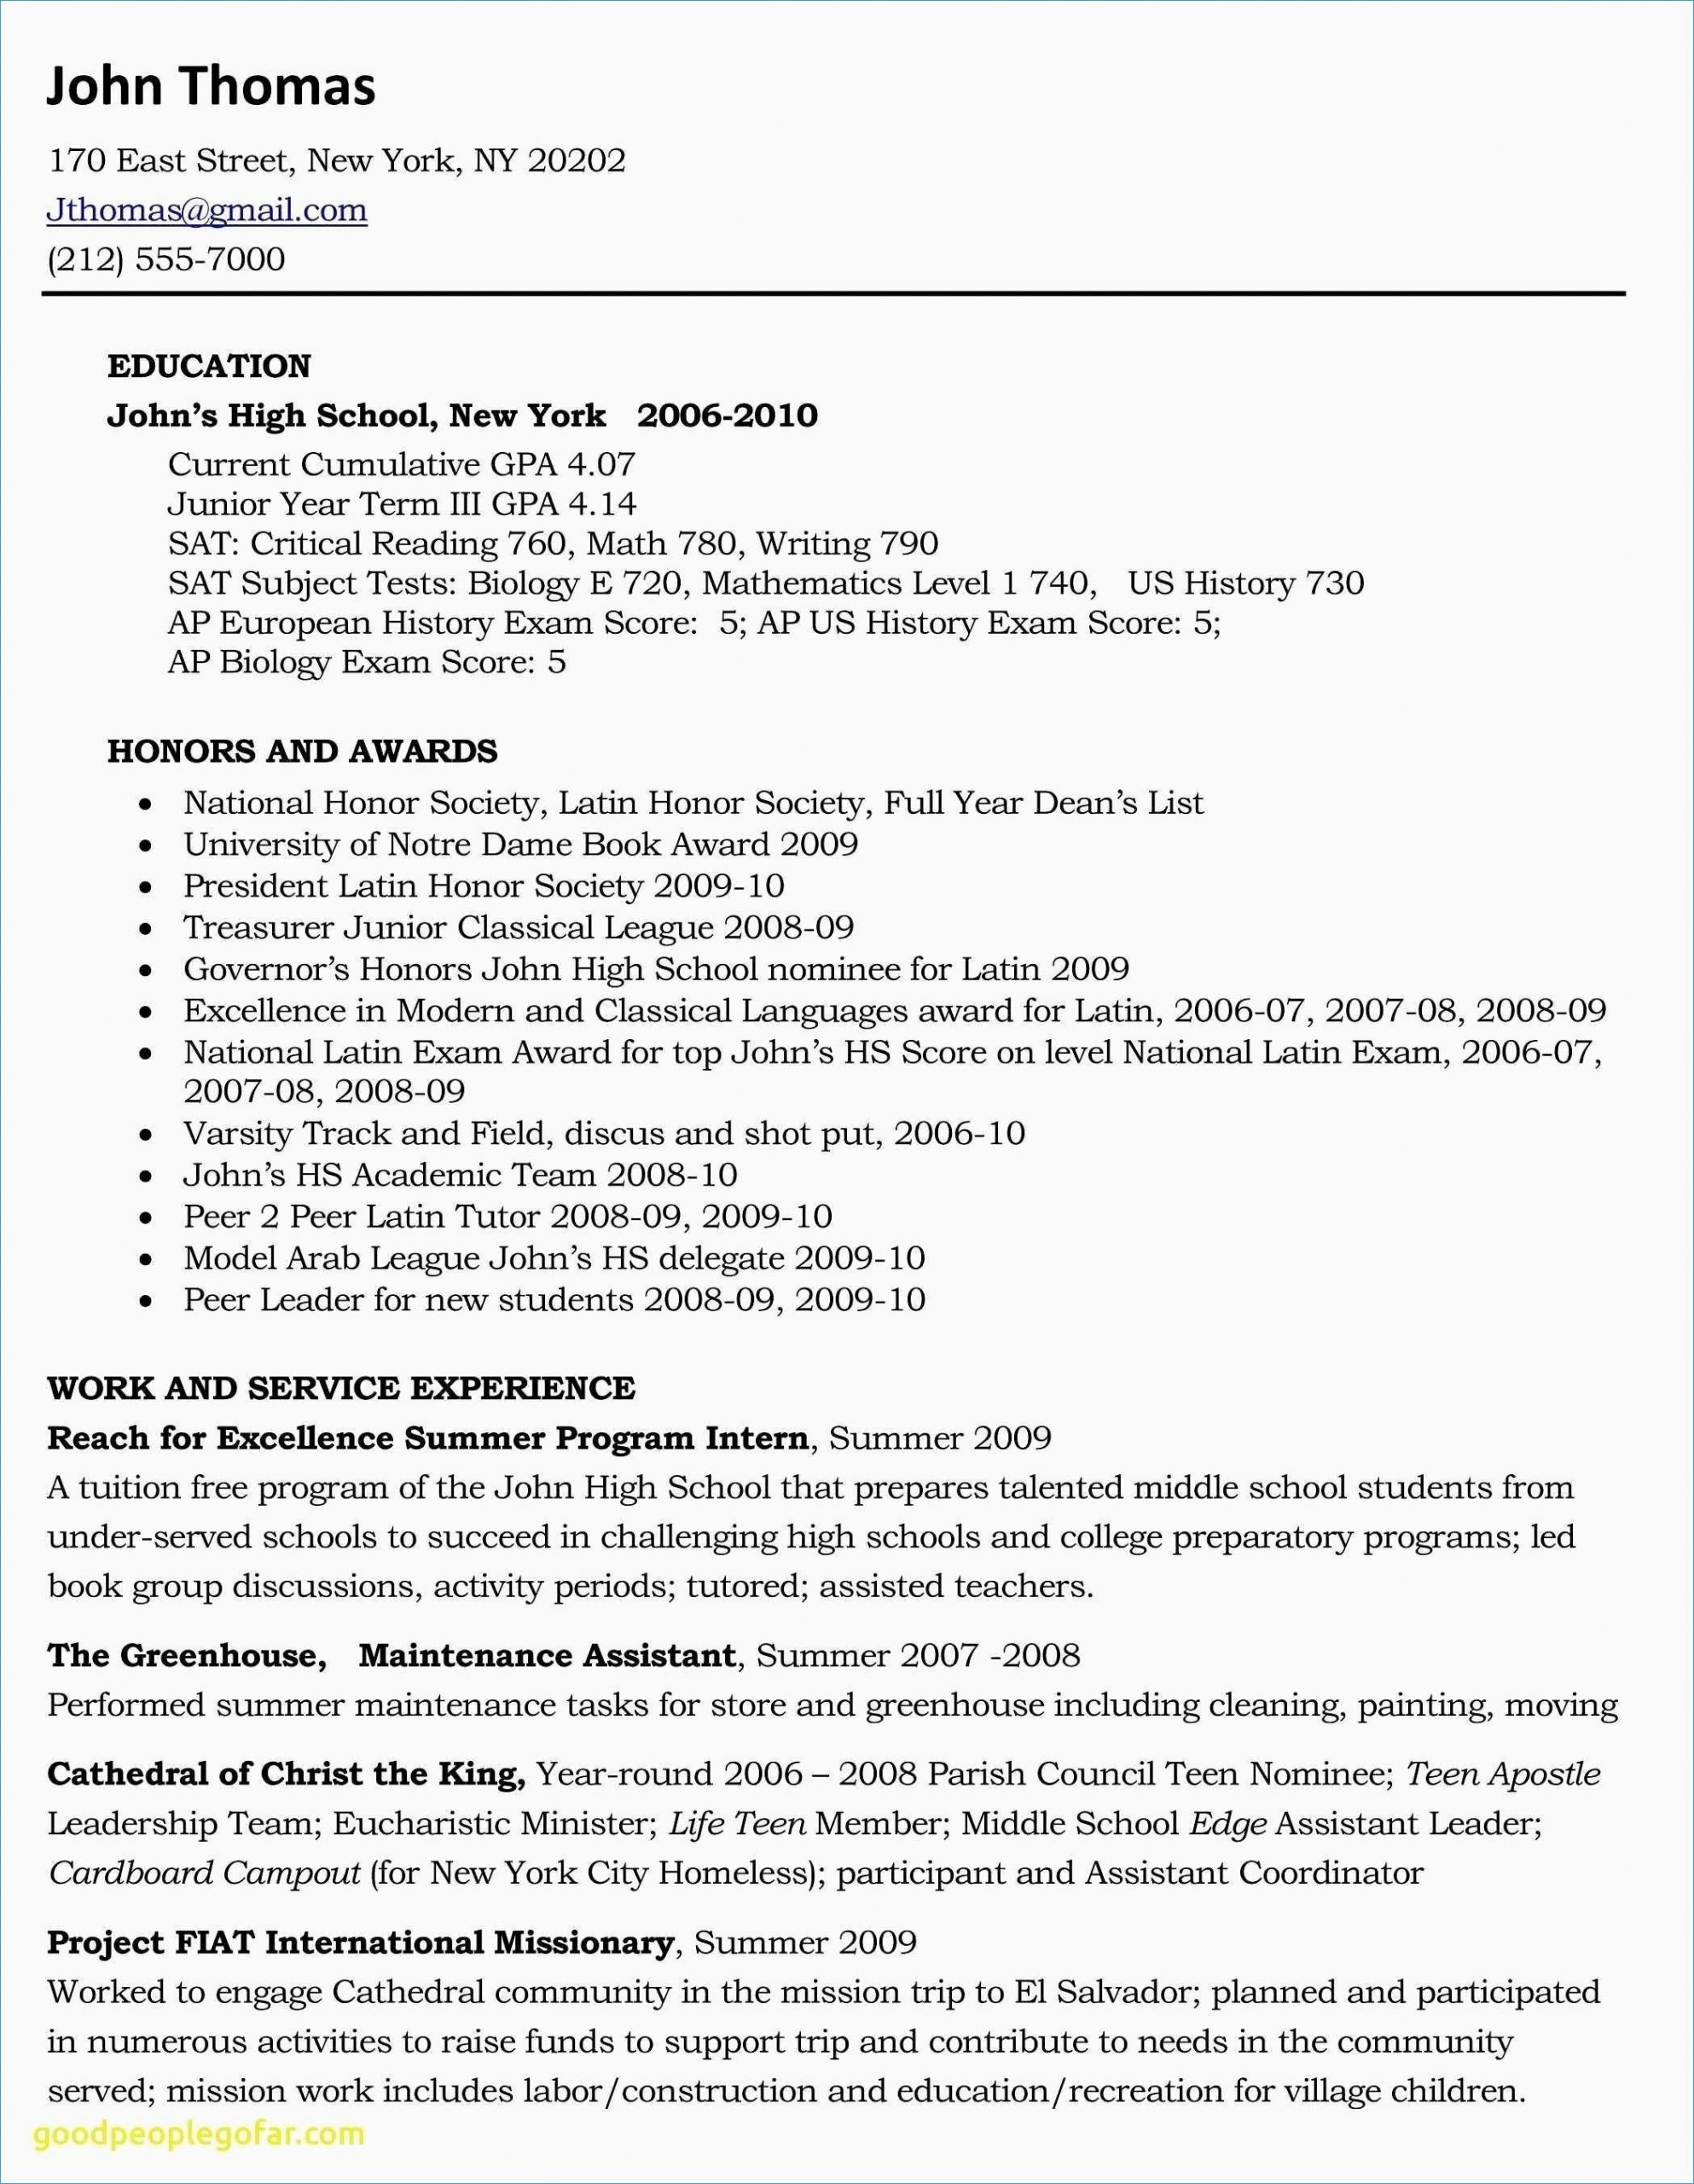 Sample Resume and Cover Letter for High School Students My Resume Einfach Sparen, Eigene Website, Cover